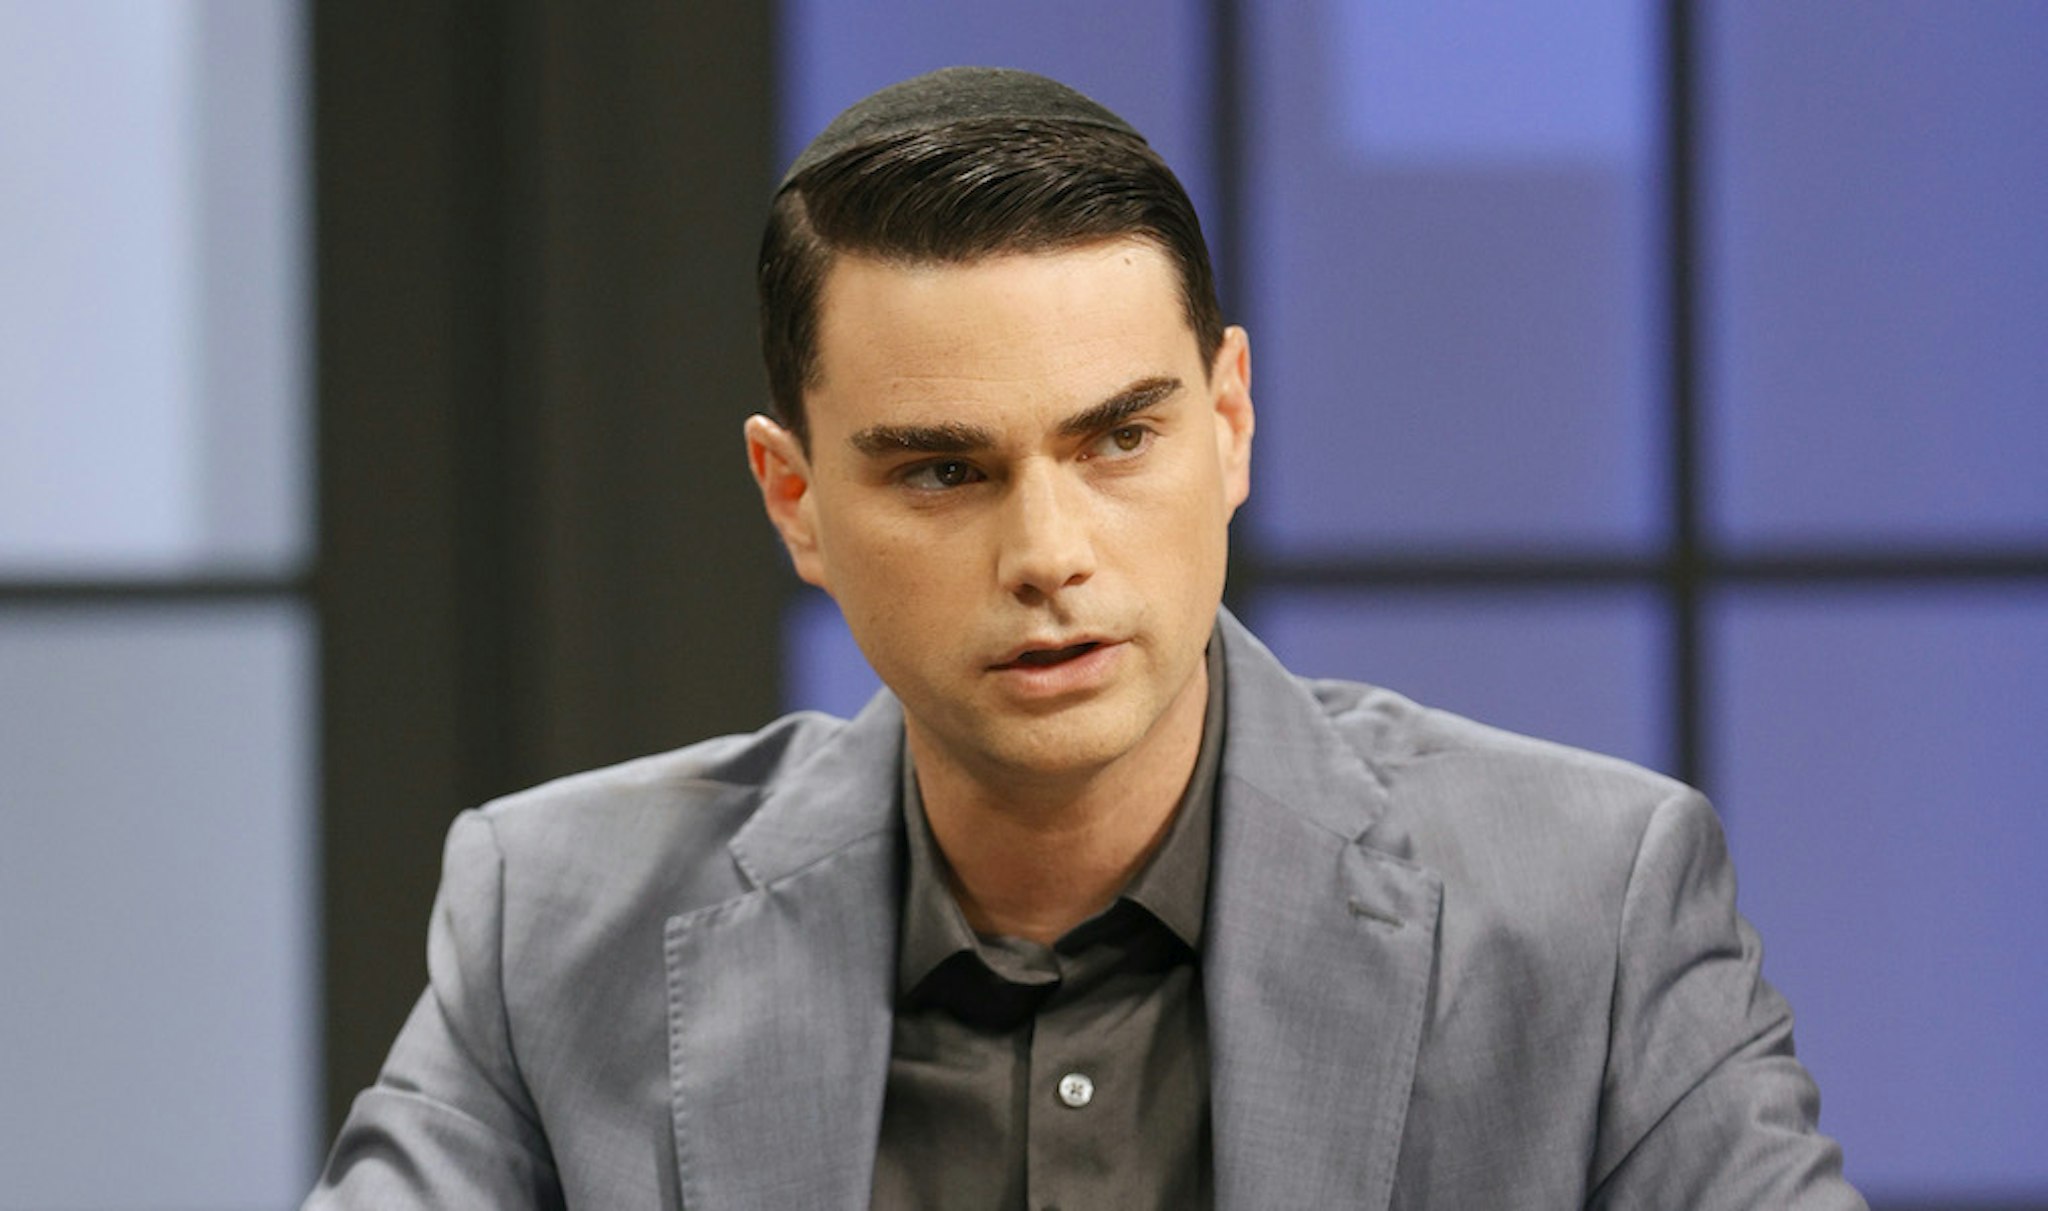 NASHVILLE, TENNESSEE - APRIL 28: Ben Shapiro is seen on the set of "Candace" on April 28, 2021 in Nashville, Tennessee. (Photo by Jason Kempin/Getty Images)